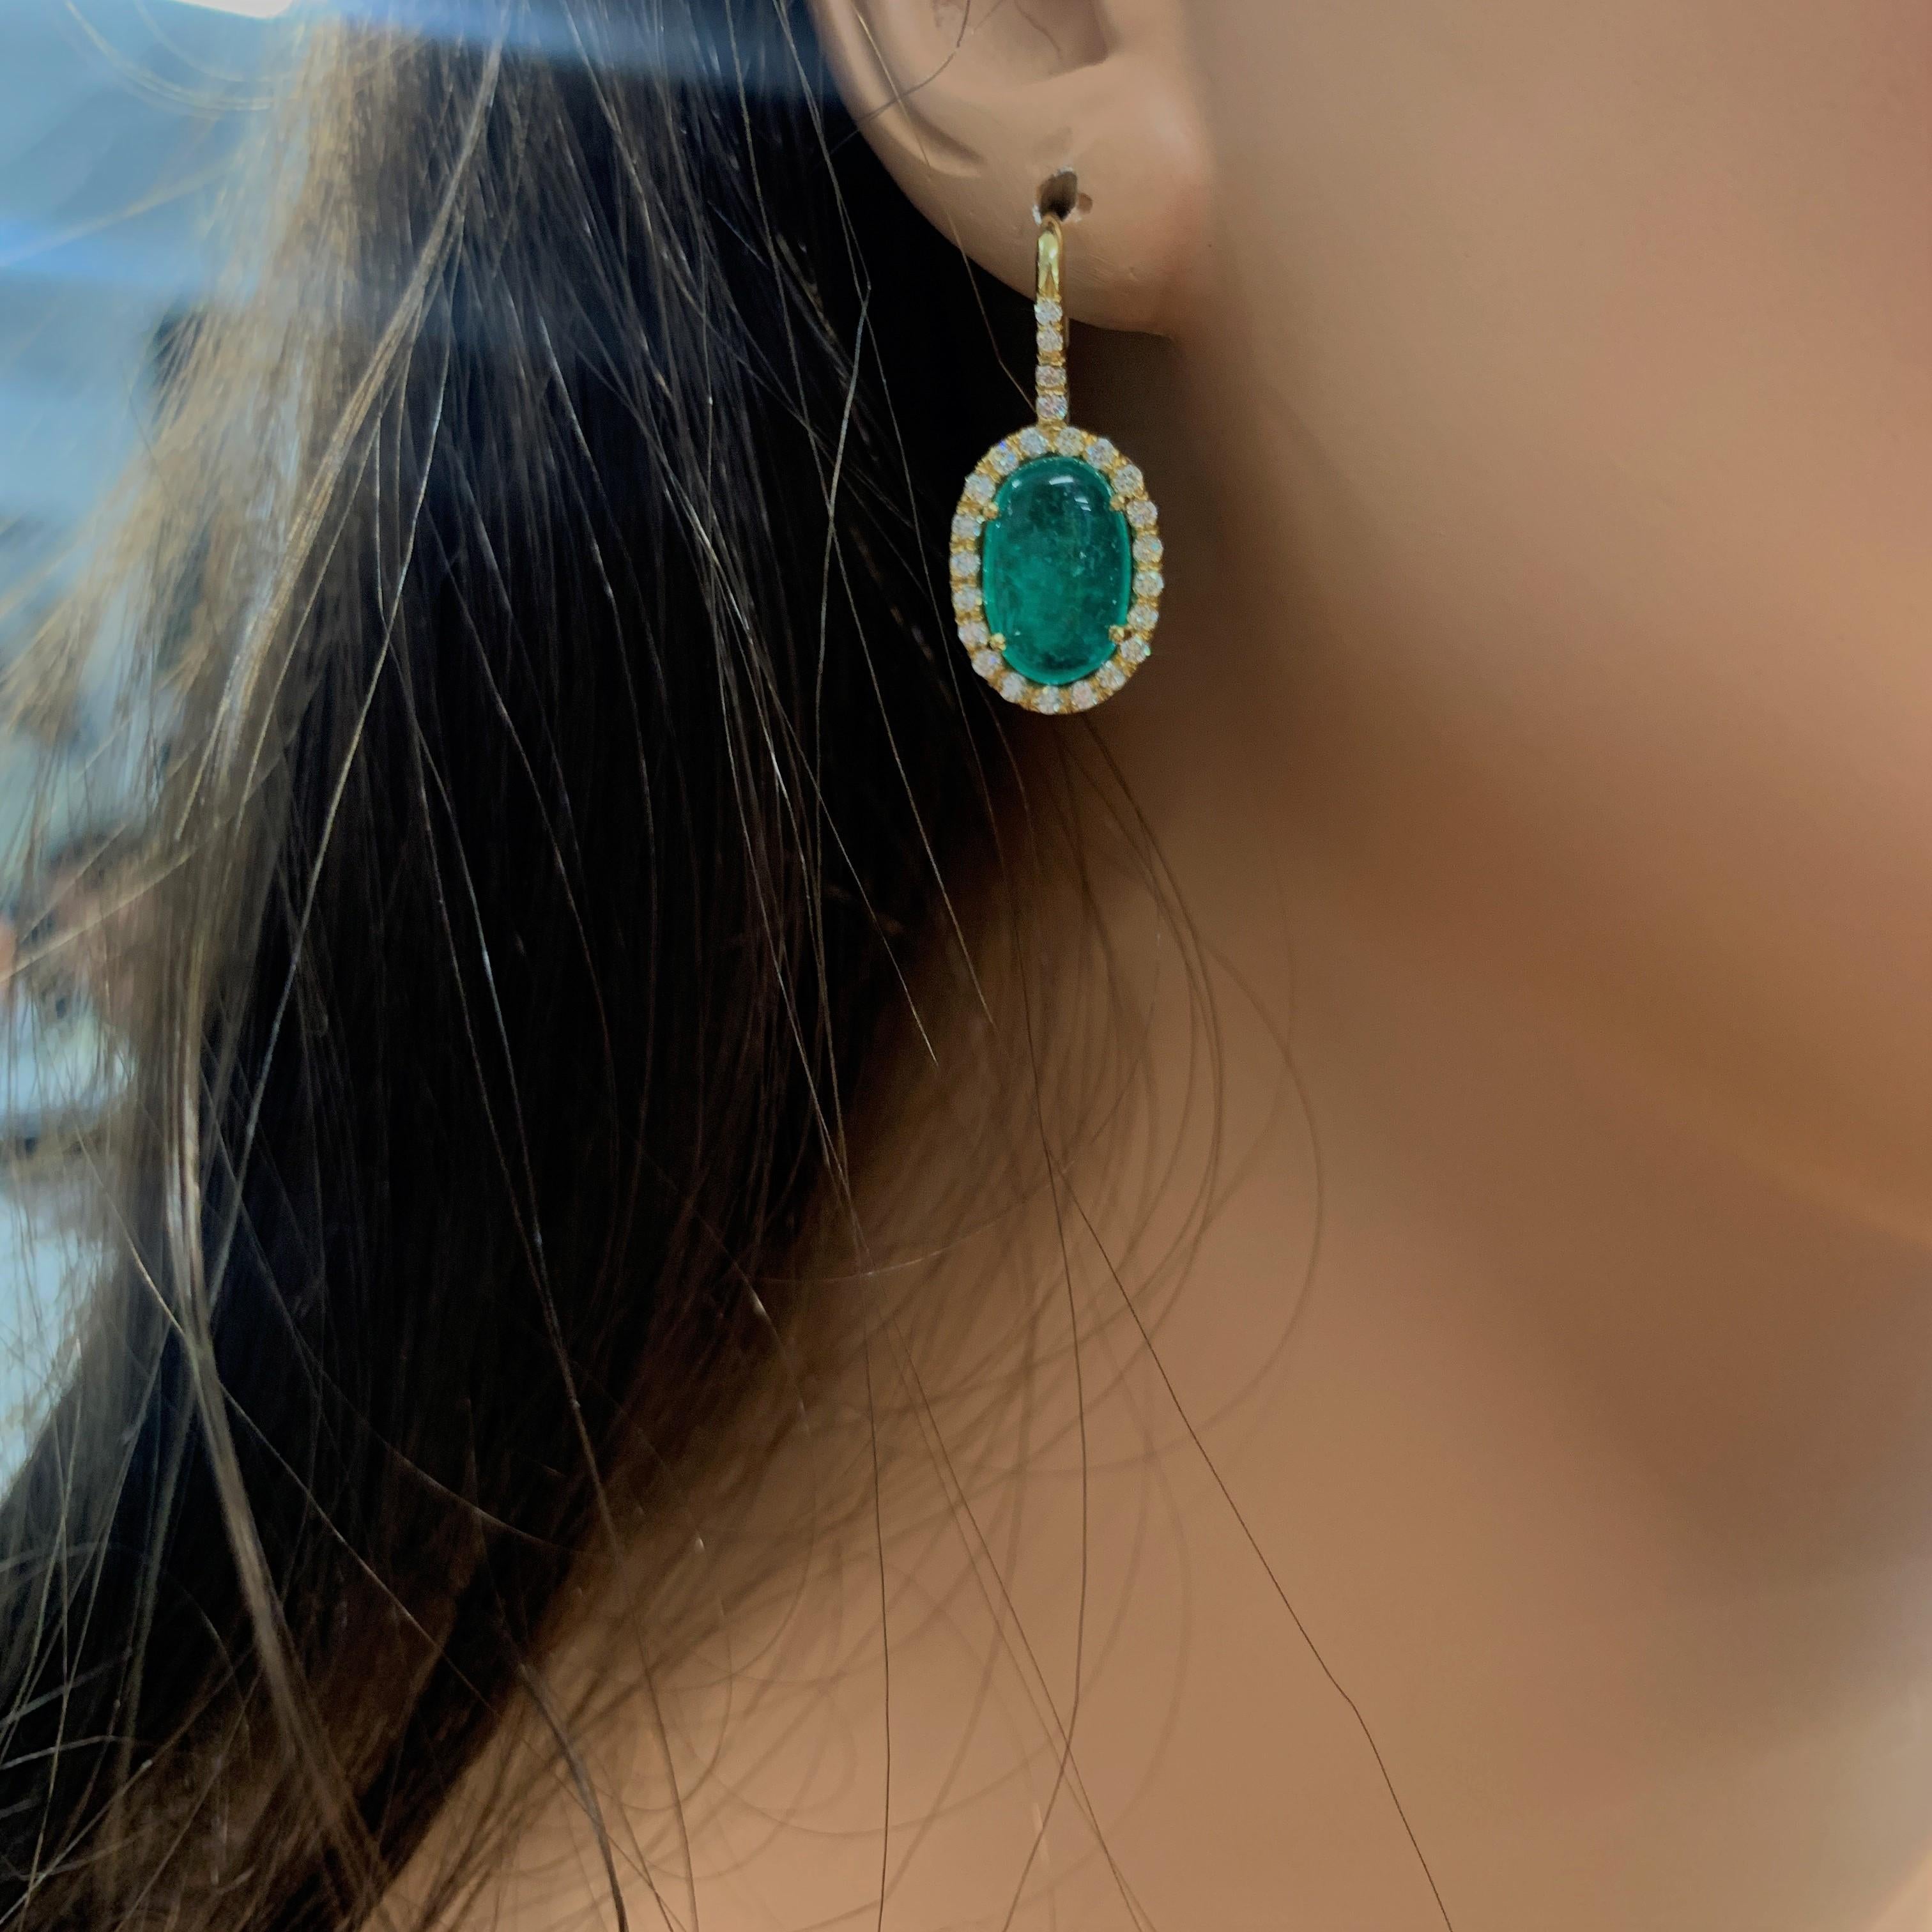 Allow these stunning emerald and diamond dangle earrings to entice you! These pretty, brightly polished 18k yellow gold drop earrings feature two oval cabochon cut intense green fine quality emeralds prong set in the middle, totaling 7.81 carats.